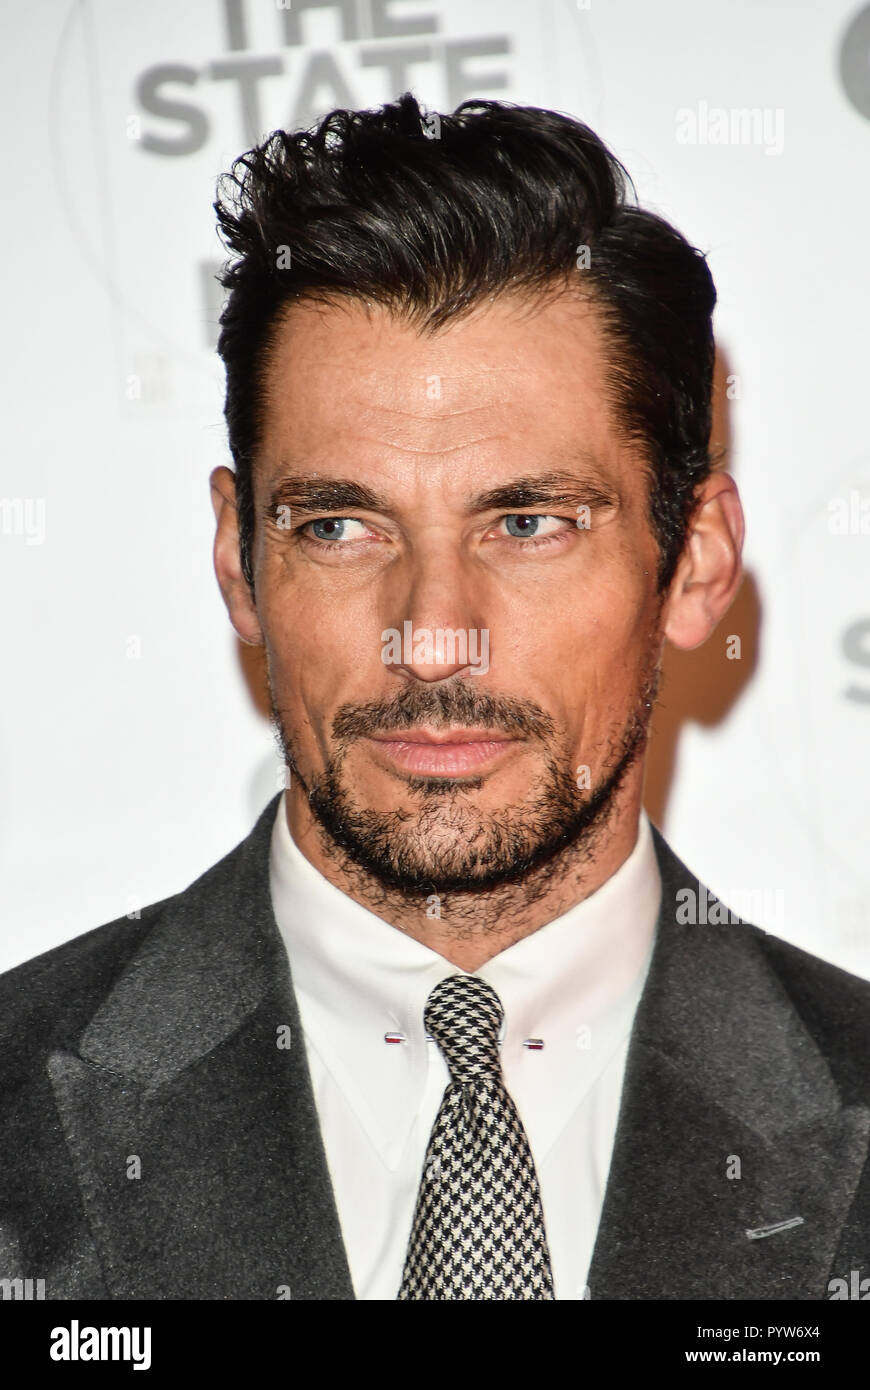 london-uk-29th-october-2018-david-gandy-arrivers-at-gq-30th-anniversary-celebration-at-sushisamba-the-market-convent-garden-on-29-october-2018-credit-picture-capitalalamy-live-news-PYW6X4.jpg